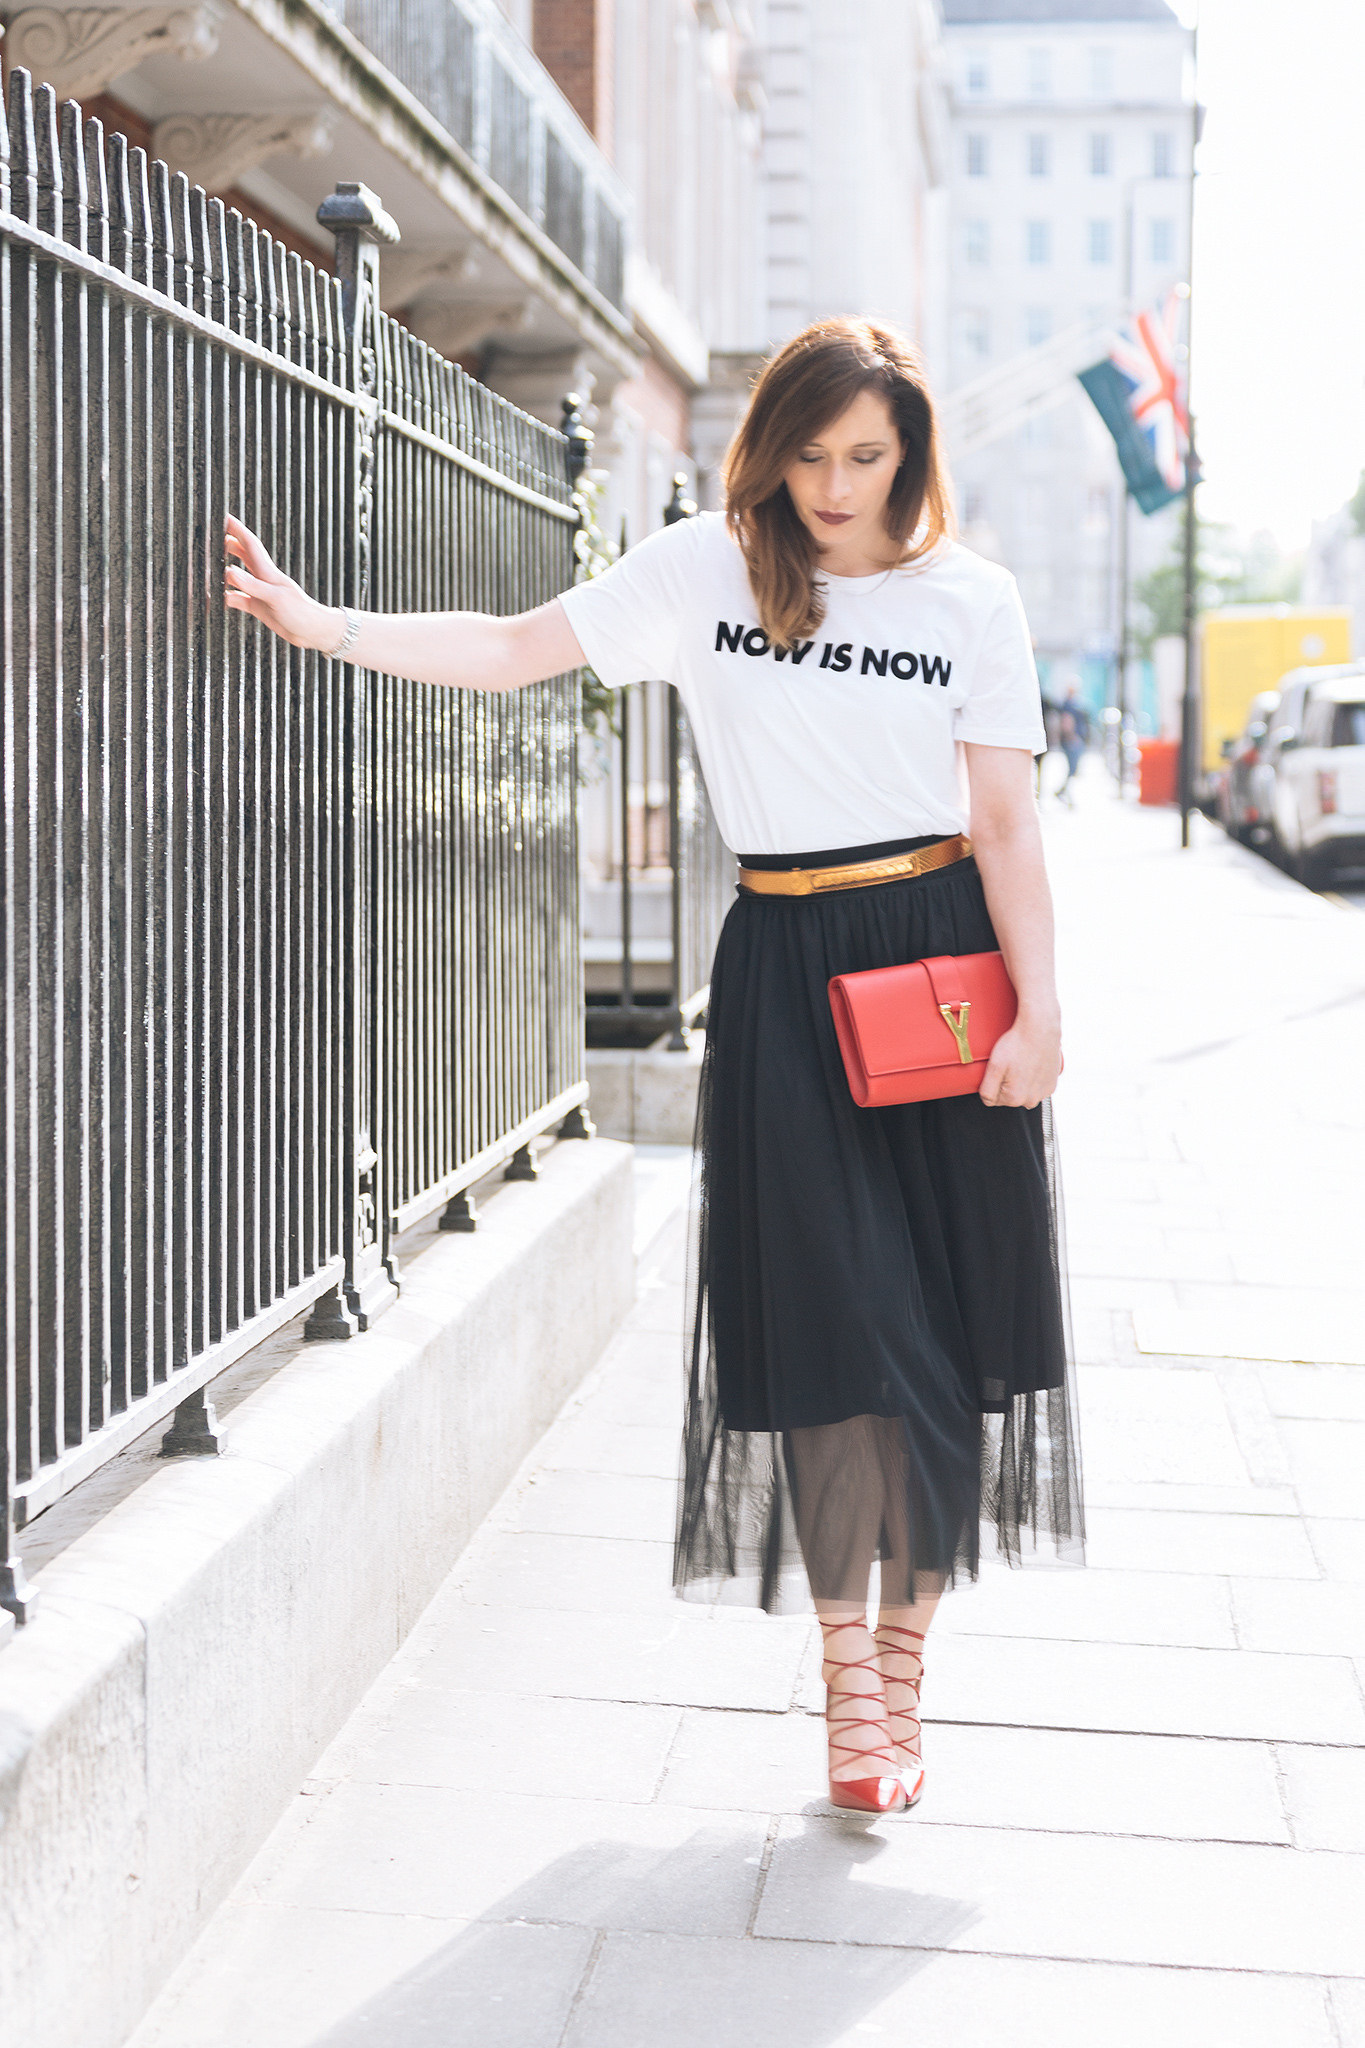 How to wear tulle skirt and look stylish